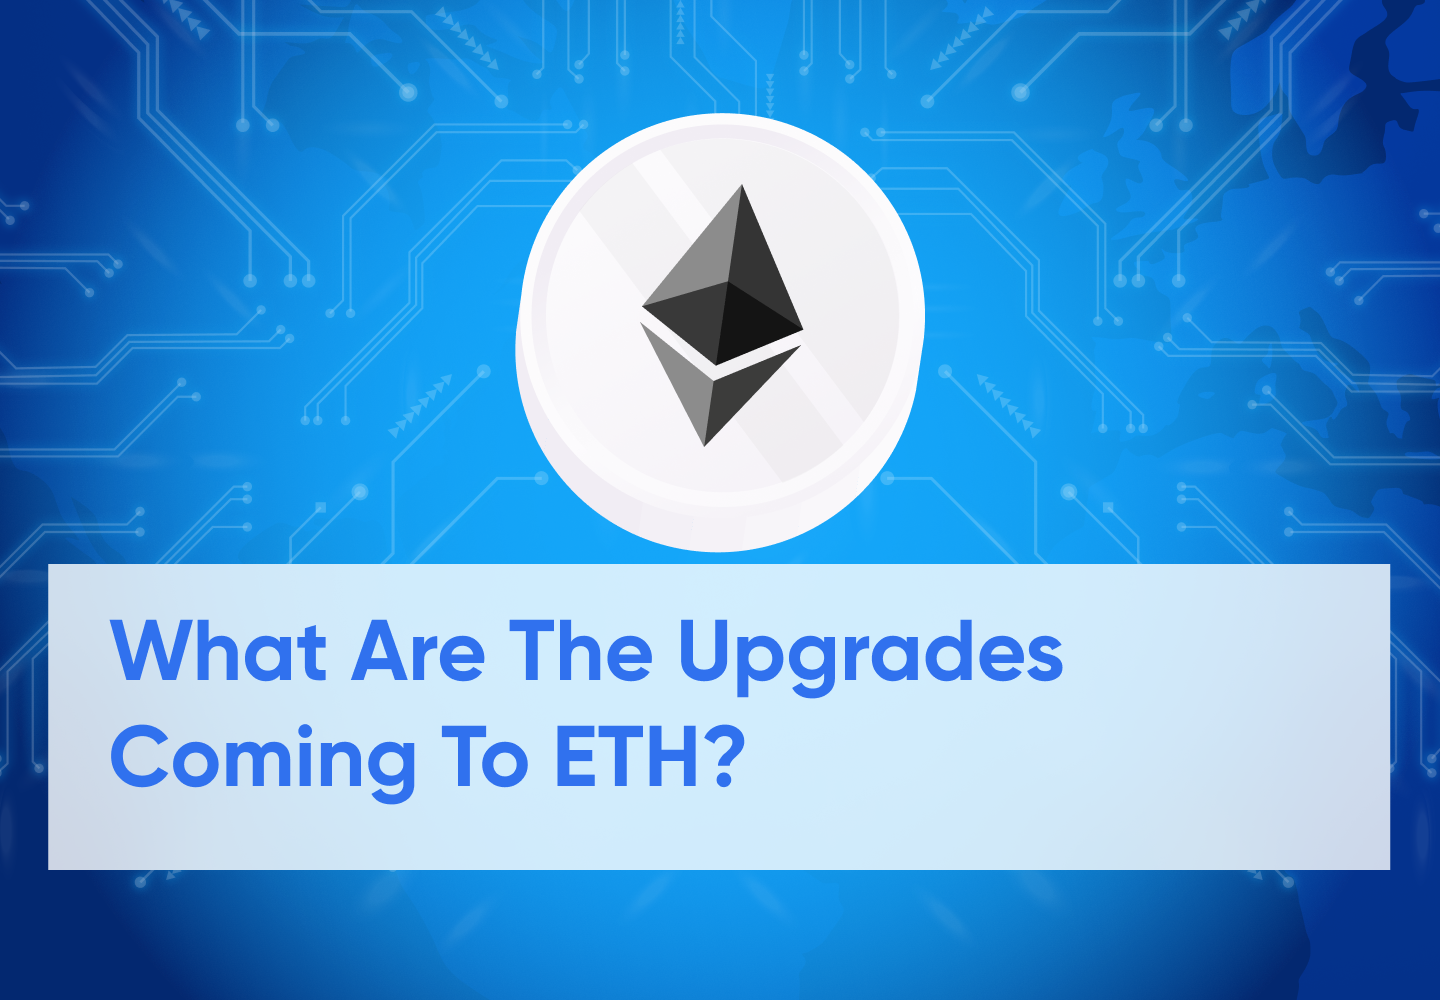 Vitalik Updates Roadmap for Ethereum, What Can We Look Forward To?